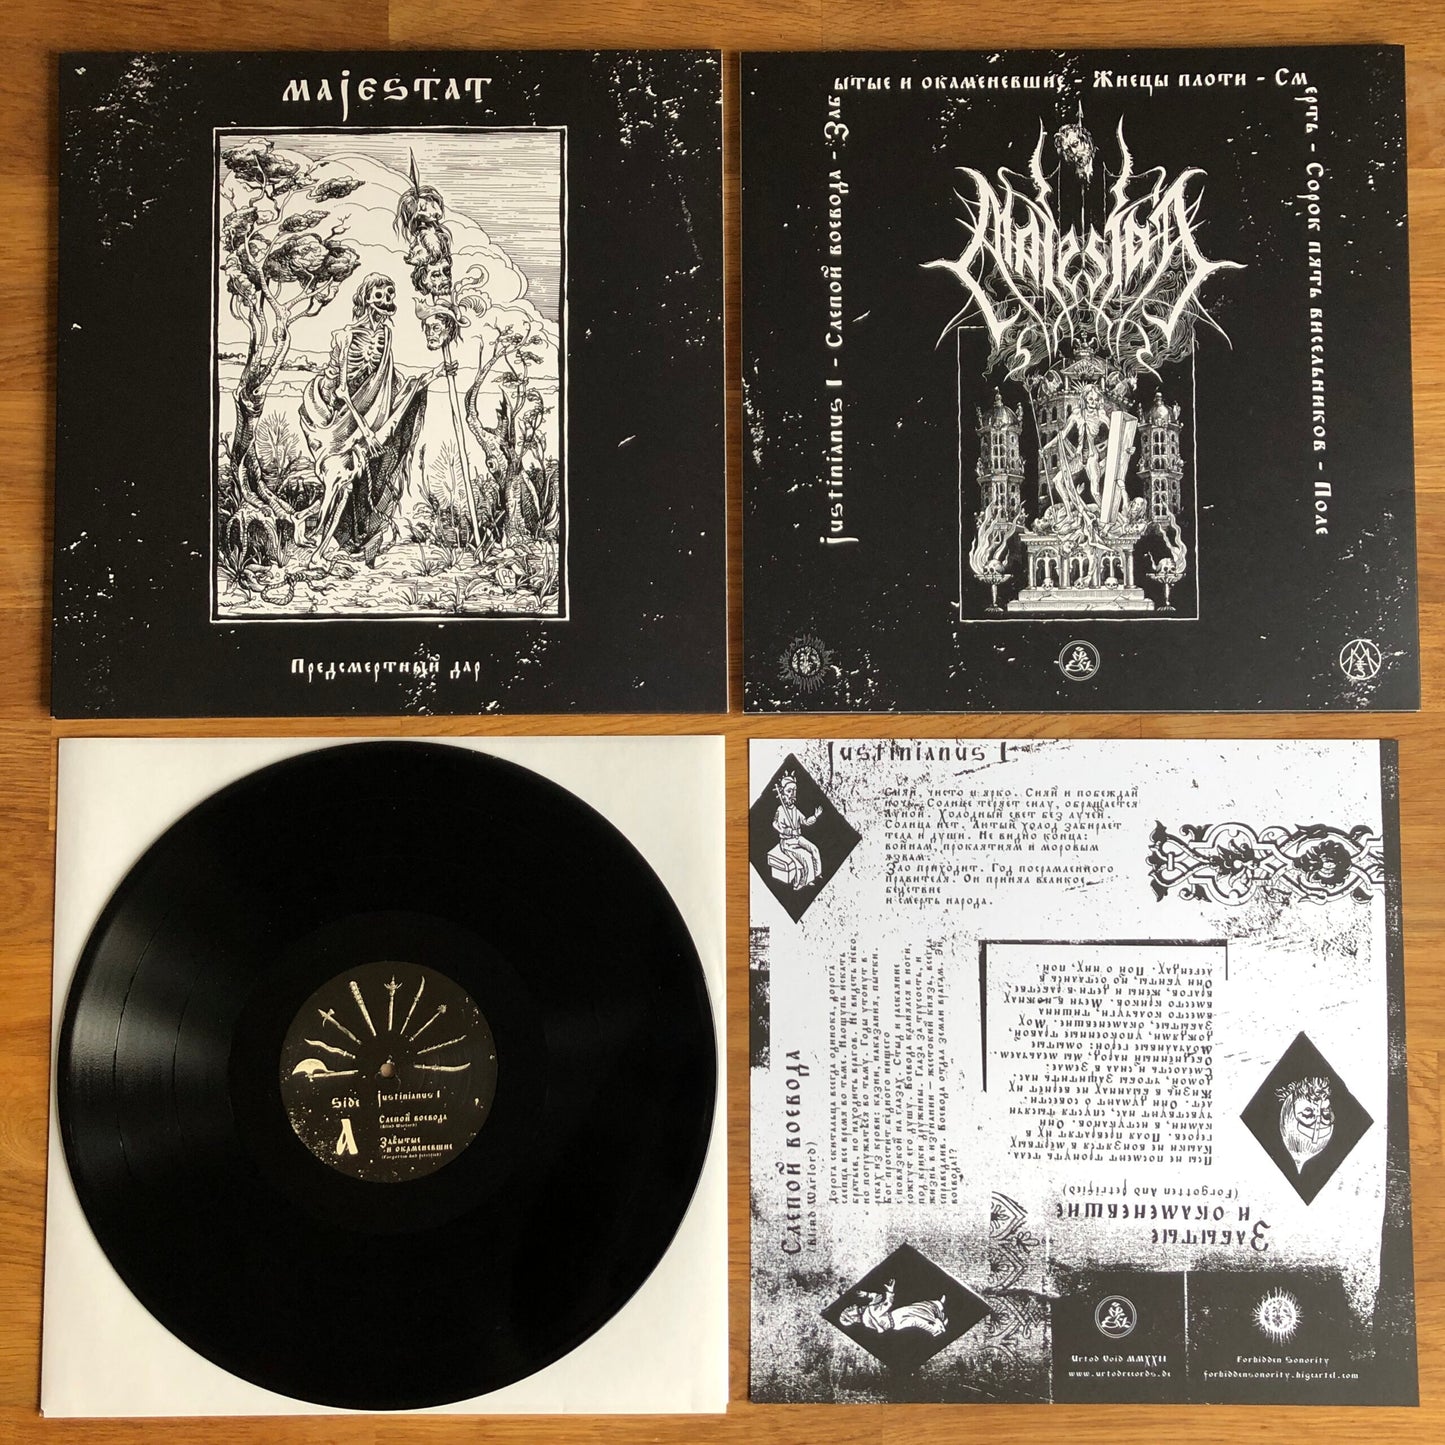 Majestat (Rus) (Предсмертный дар (A Gift Before Death)" - 12" LP